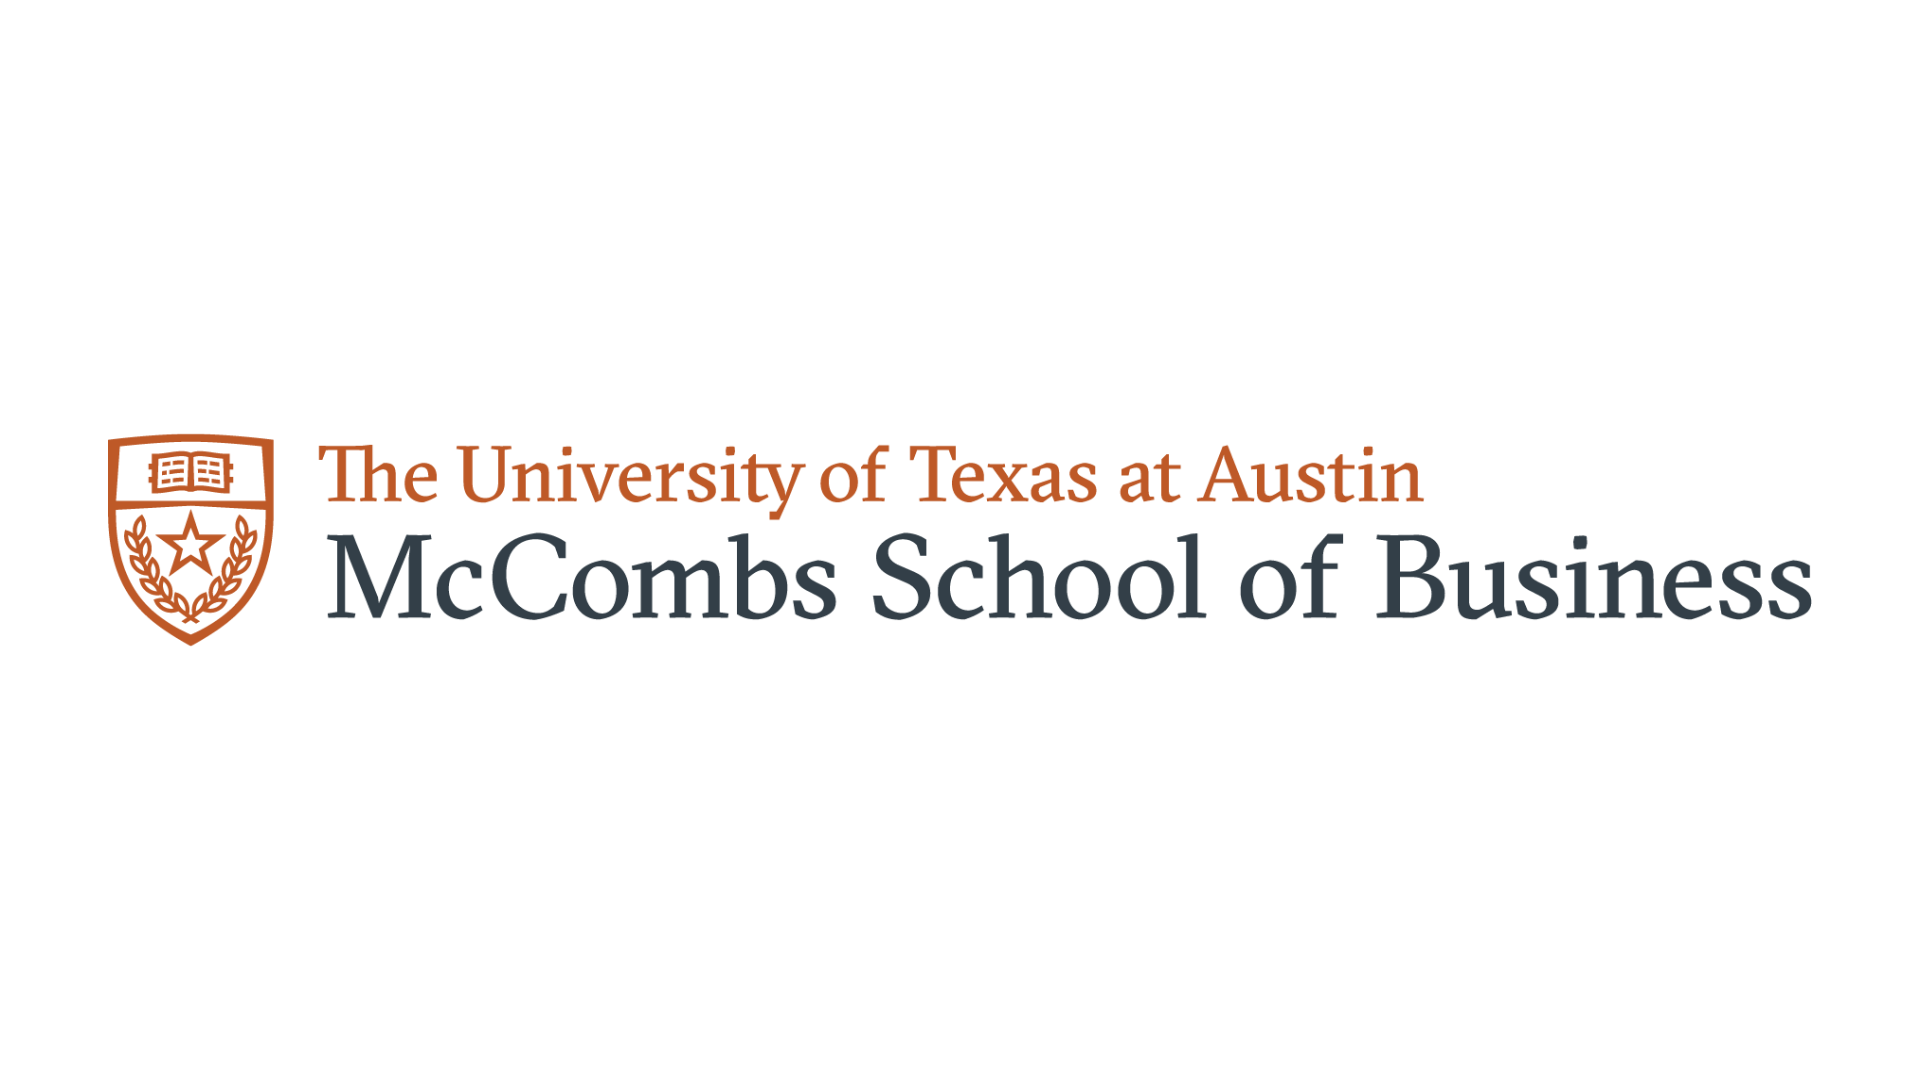 The University of Texas McCombs School of Business